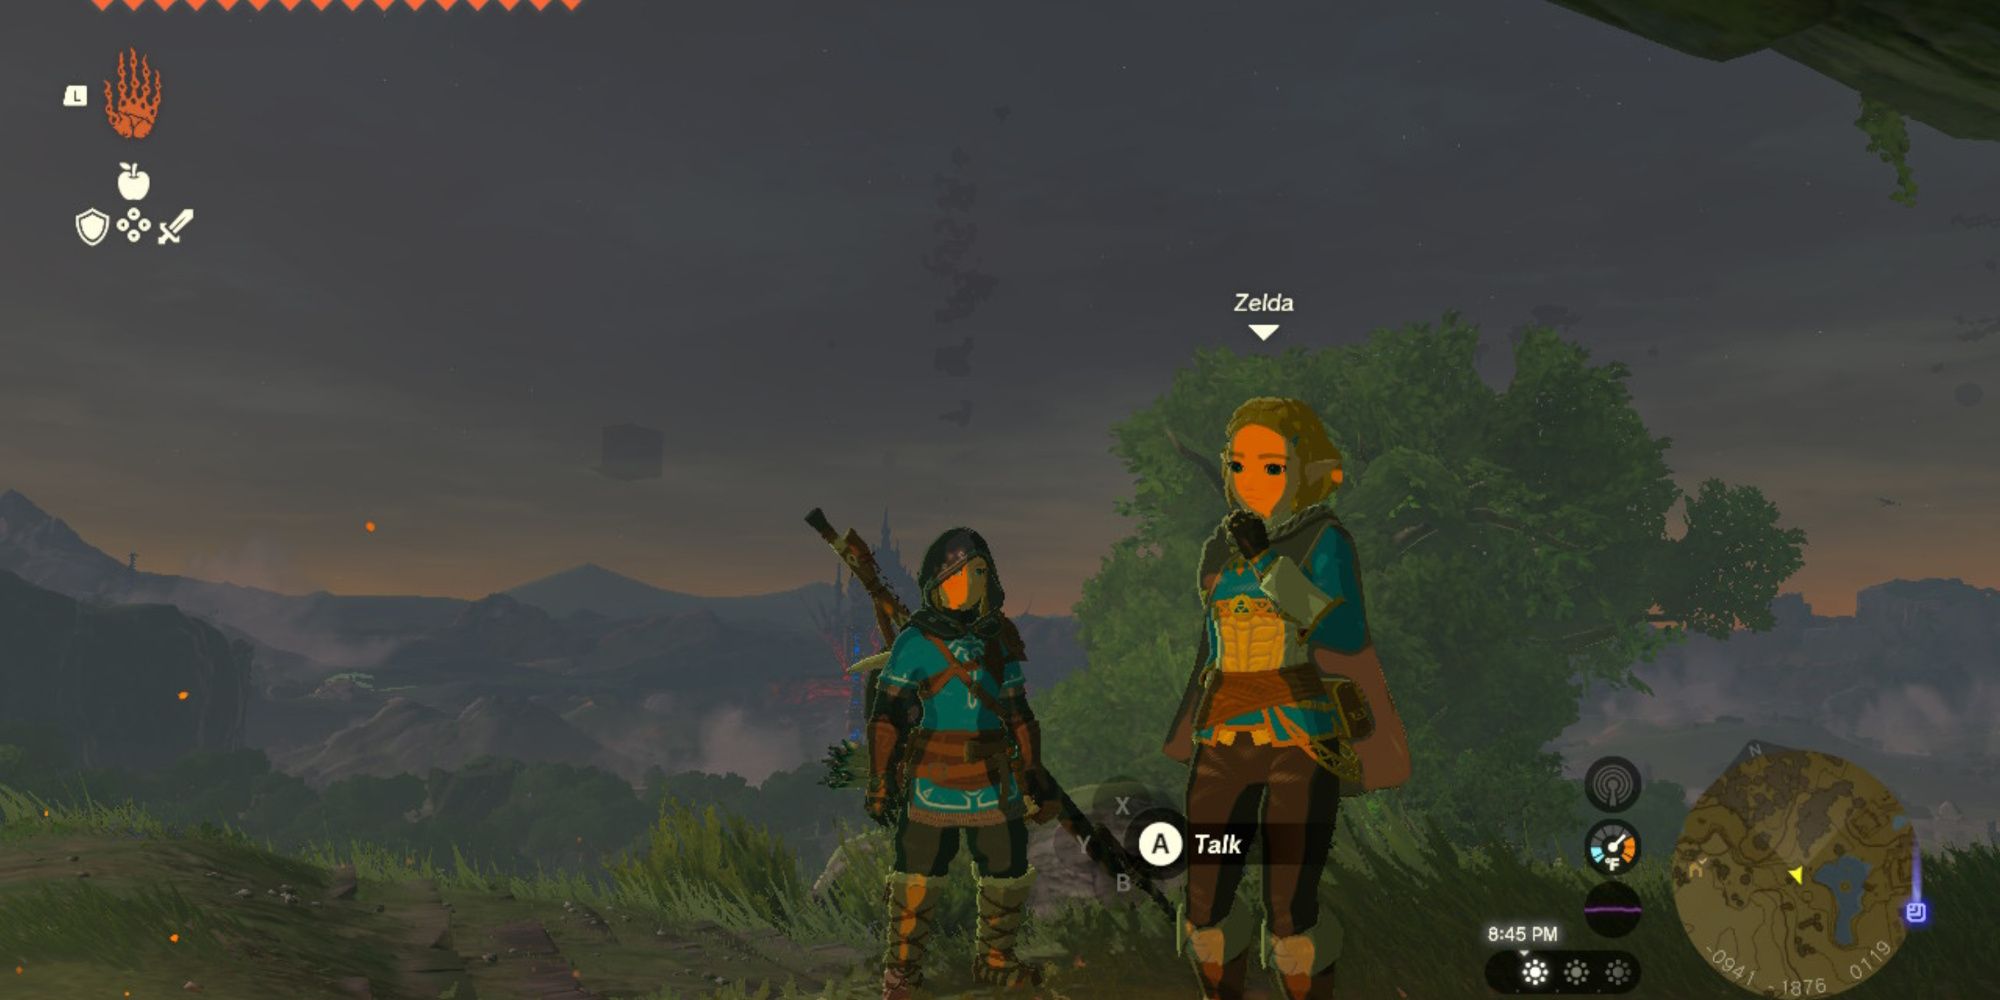 The Legend of Zelda: Tears of the Kingdom: Infantrymen of the Ega Clan disguised as Zelda on the Great Plateau near the Temple of Resurrection